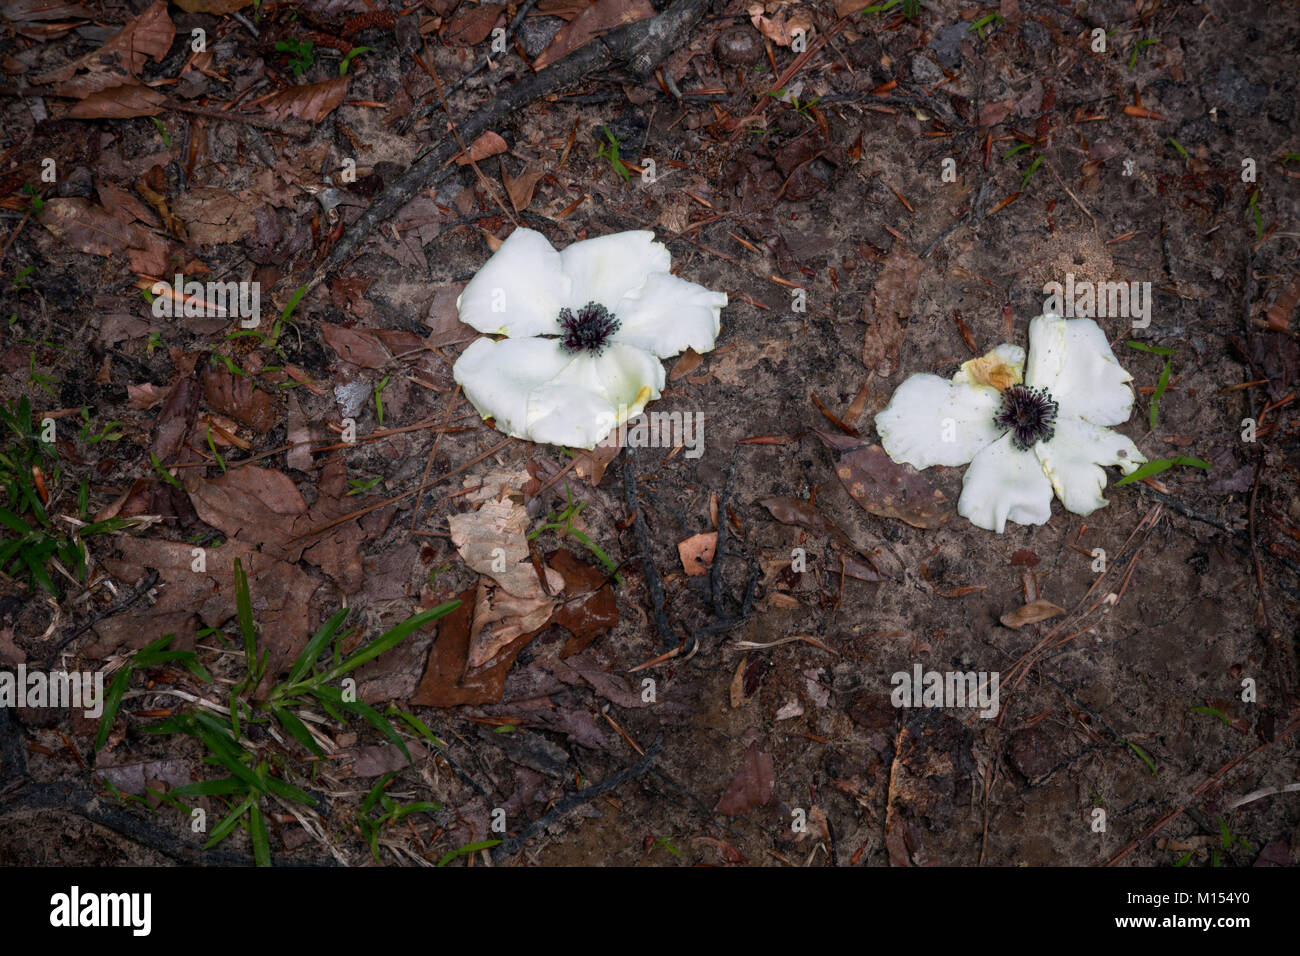 NC01478-00...NORTH CAROLINA - Blossoms from a dogwood tree on the ground at a backcountry campsite in Merchant Millpond State Park. Stock Photo